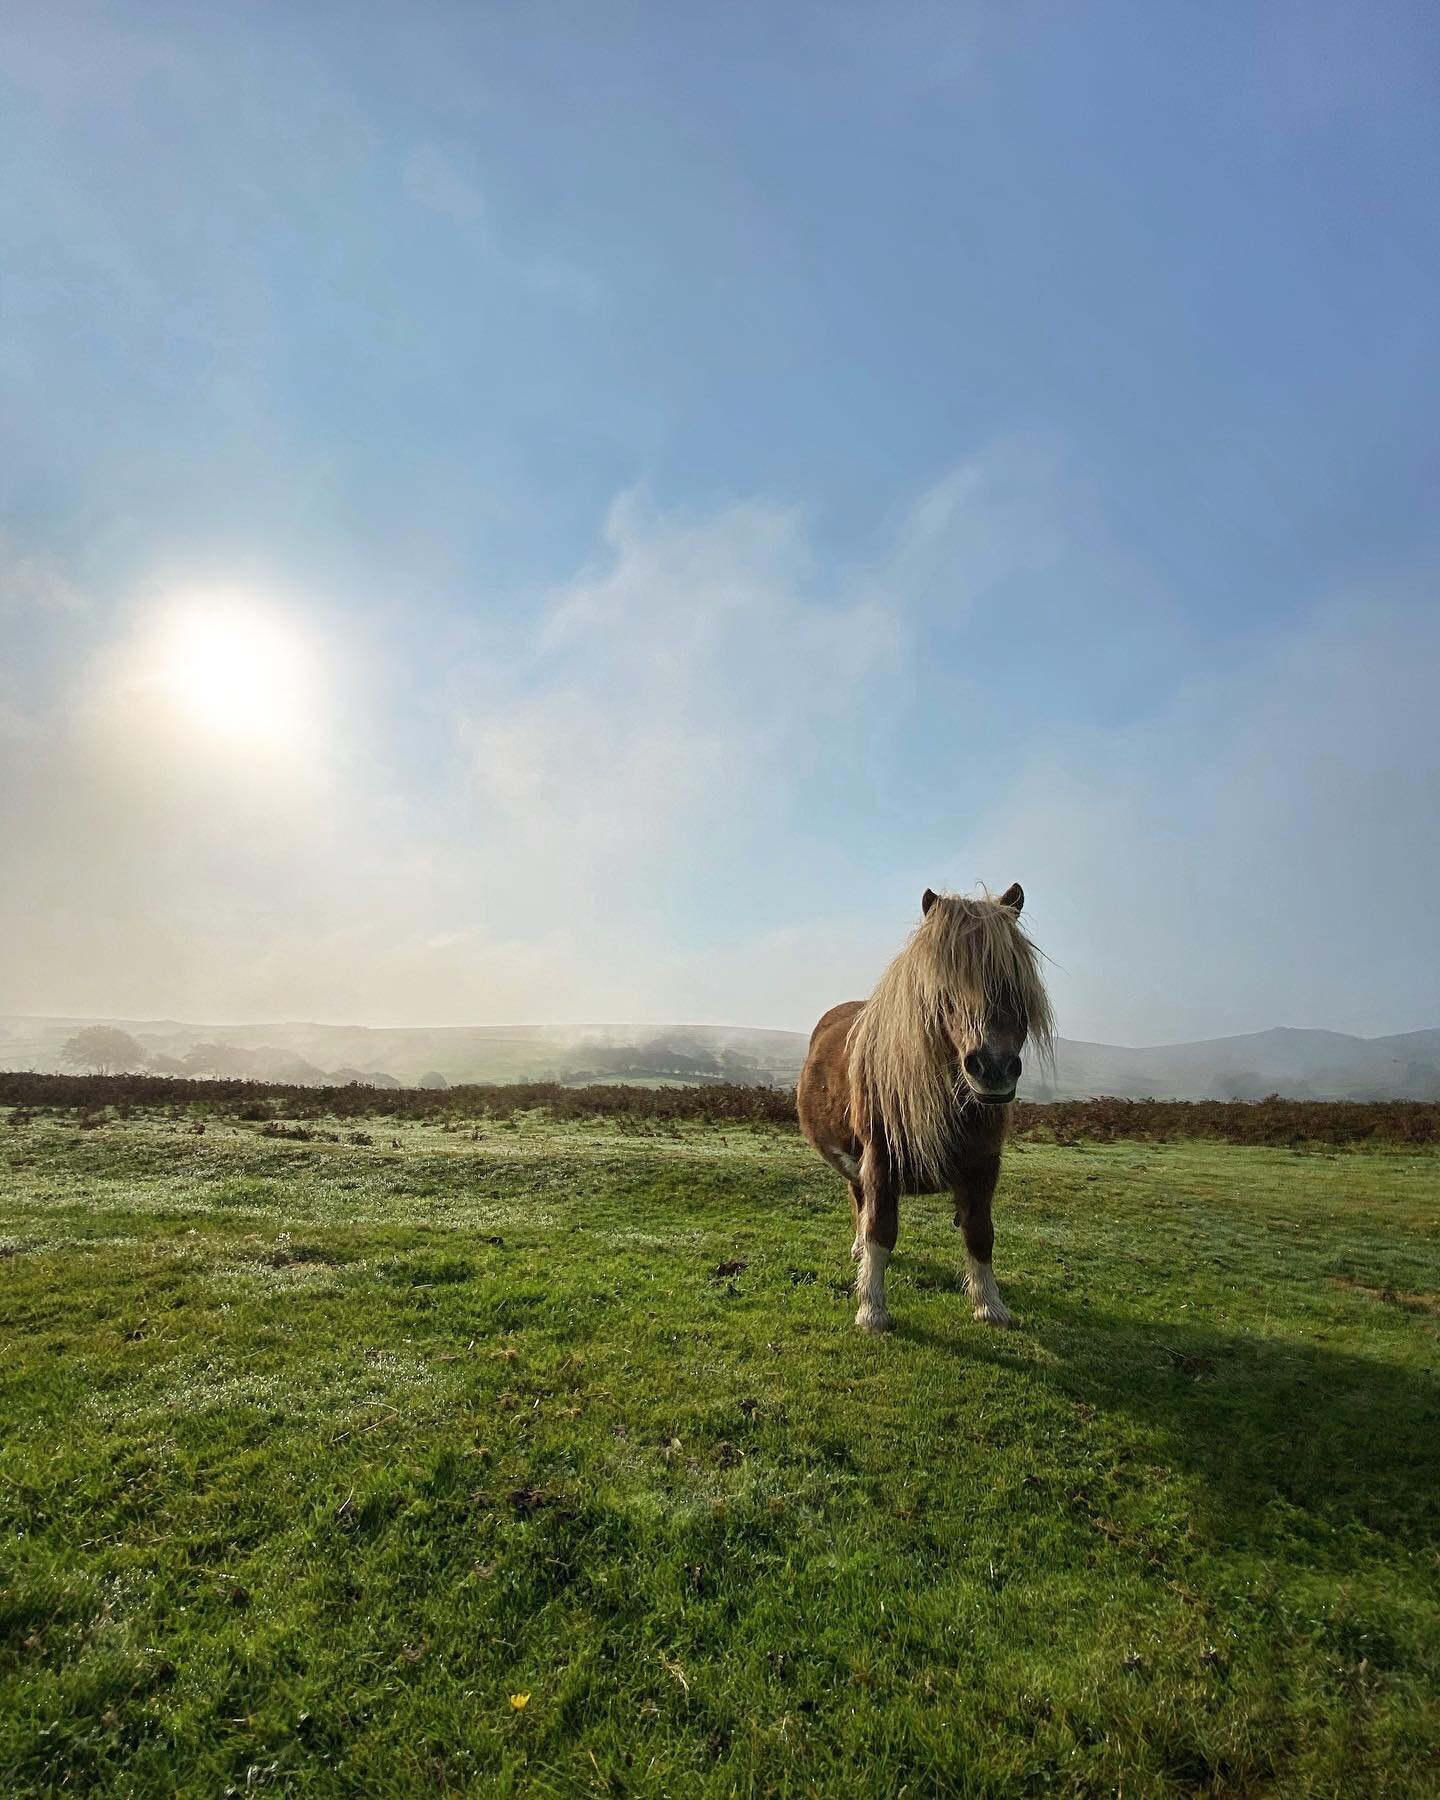 It&rsquo;s been a week of misty mornings and sunny afternoons. Classic late summer weather for Dartmoor.